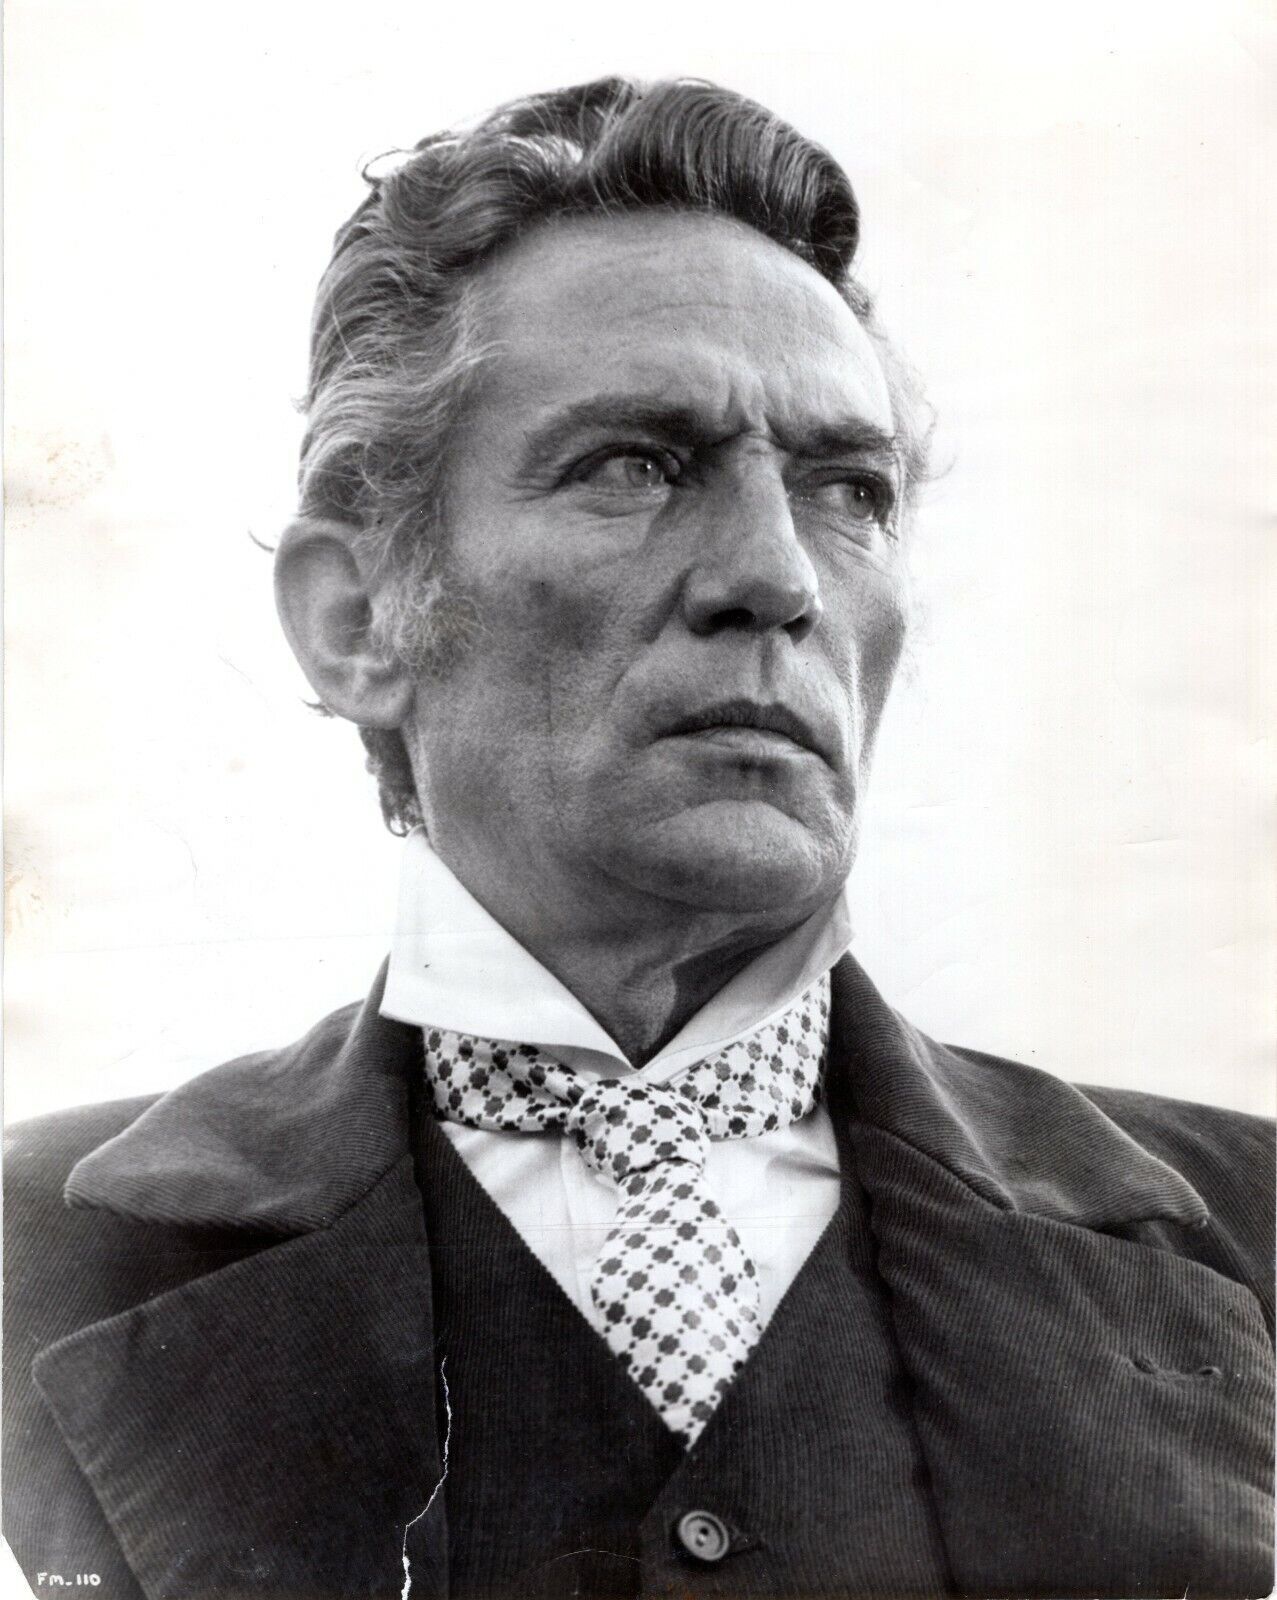 PETER FINCH Actor FAR FROM THE MADDING CROWD Vintage 8x10 Promo News Photo Poster painting 1968